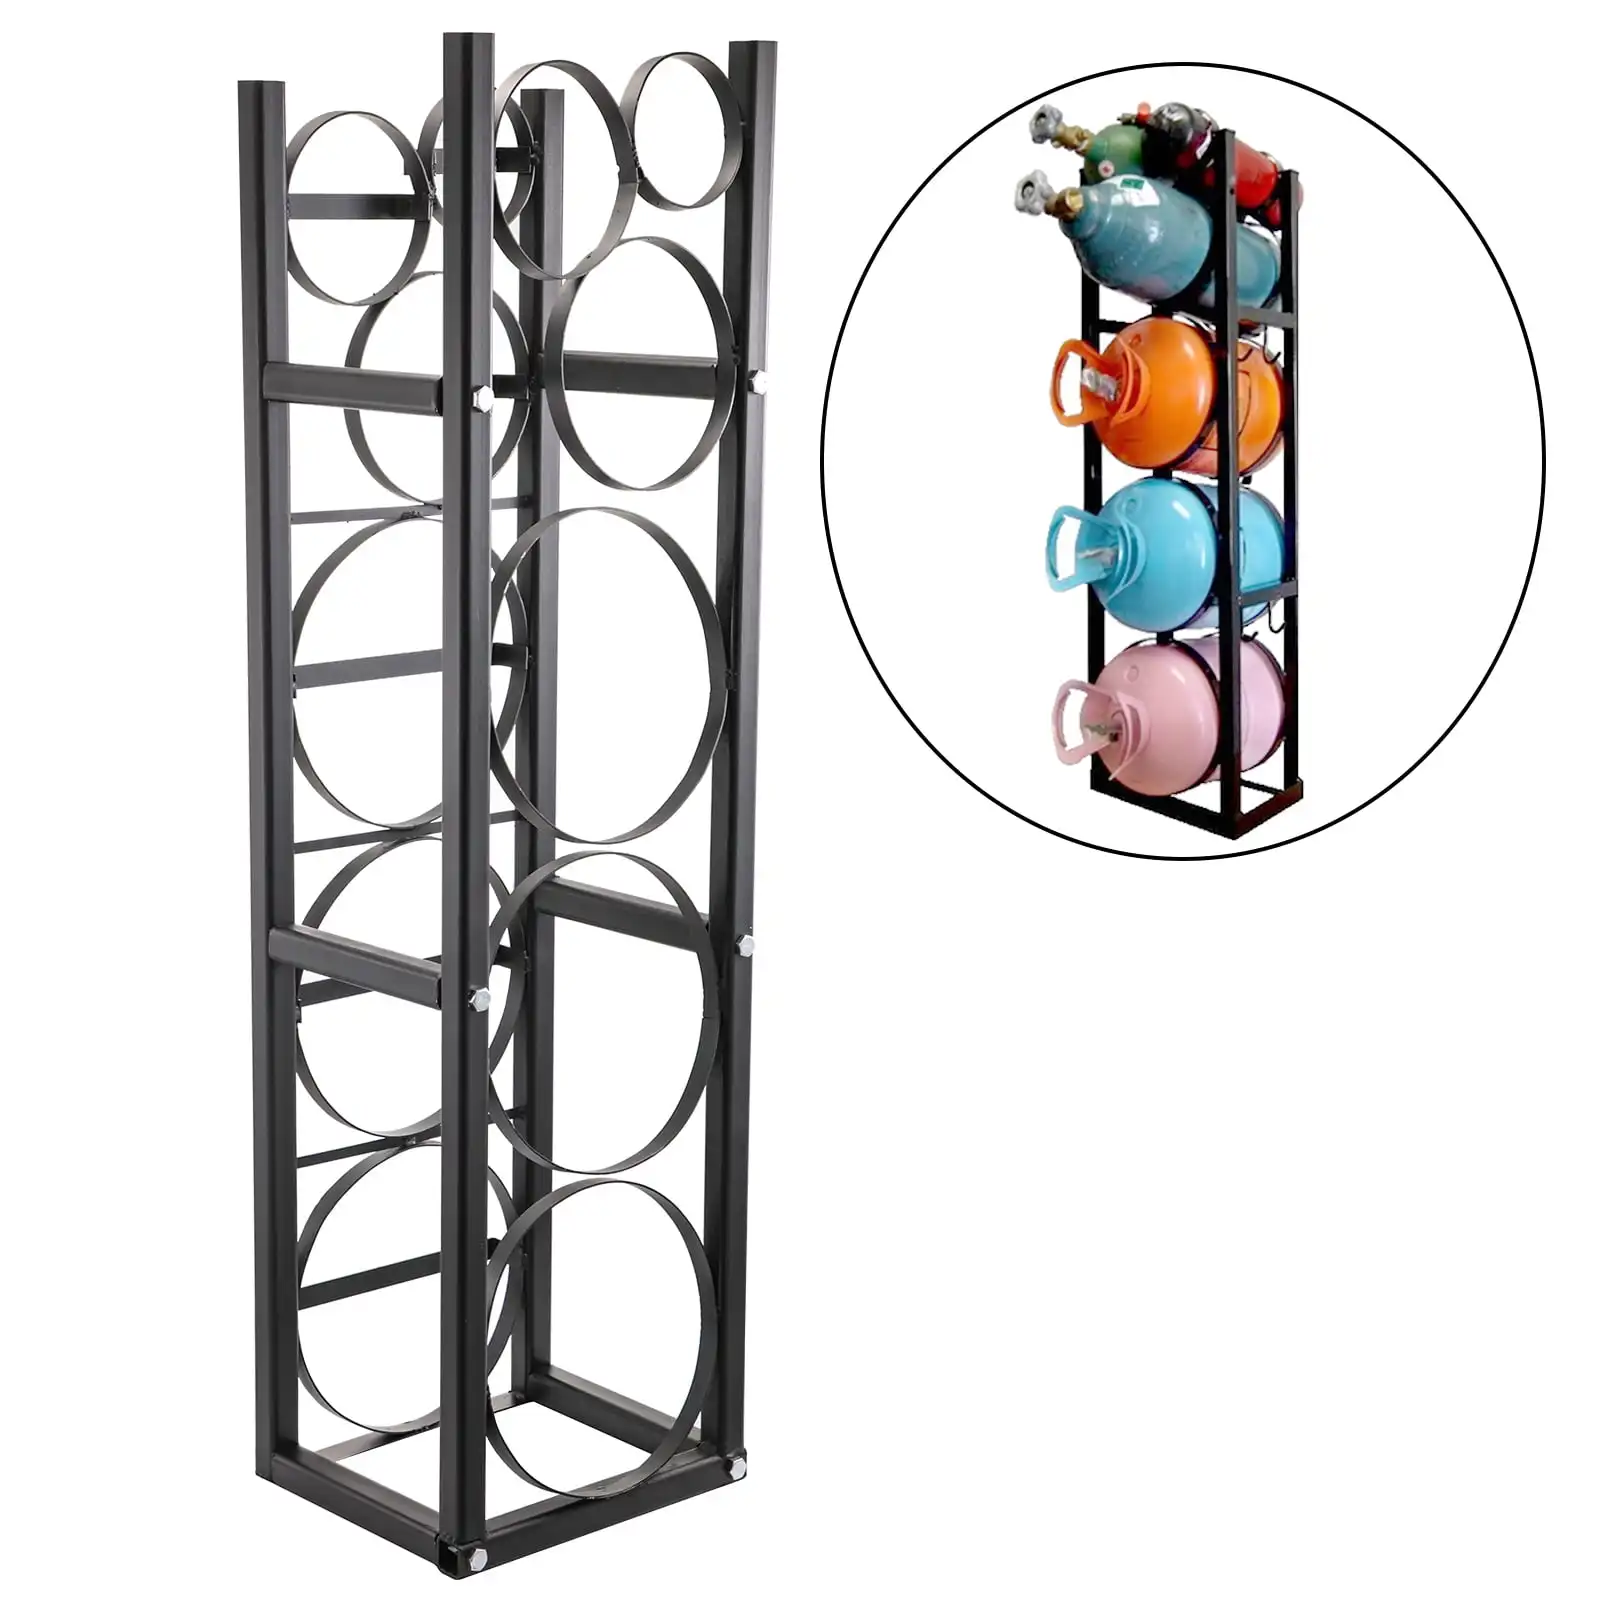 

Refrigerant Tank Rack, Cylinder Tank Utility Rack with 3-30lb and Other 3 Saving Space for Gas Oxygen Nitrogen Storage